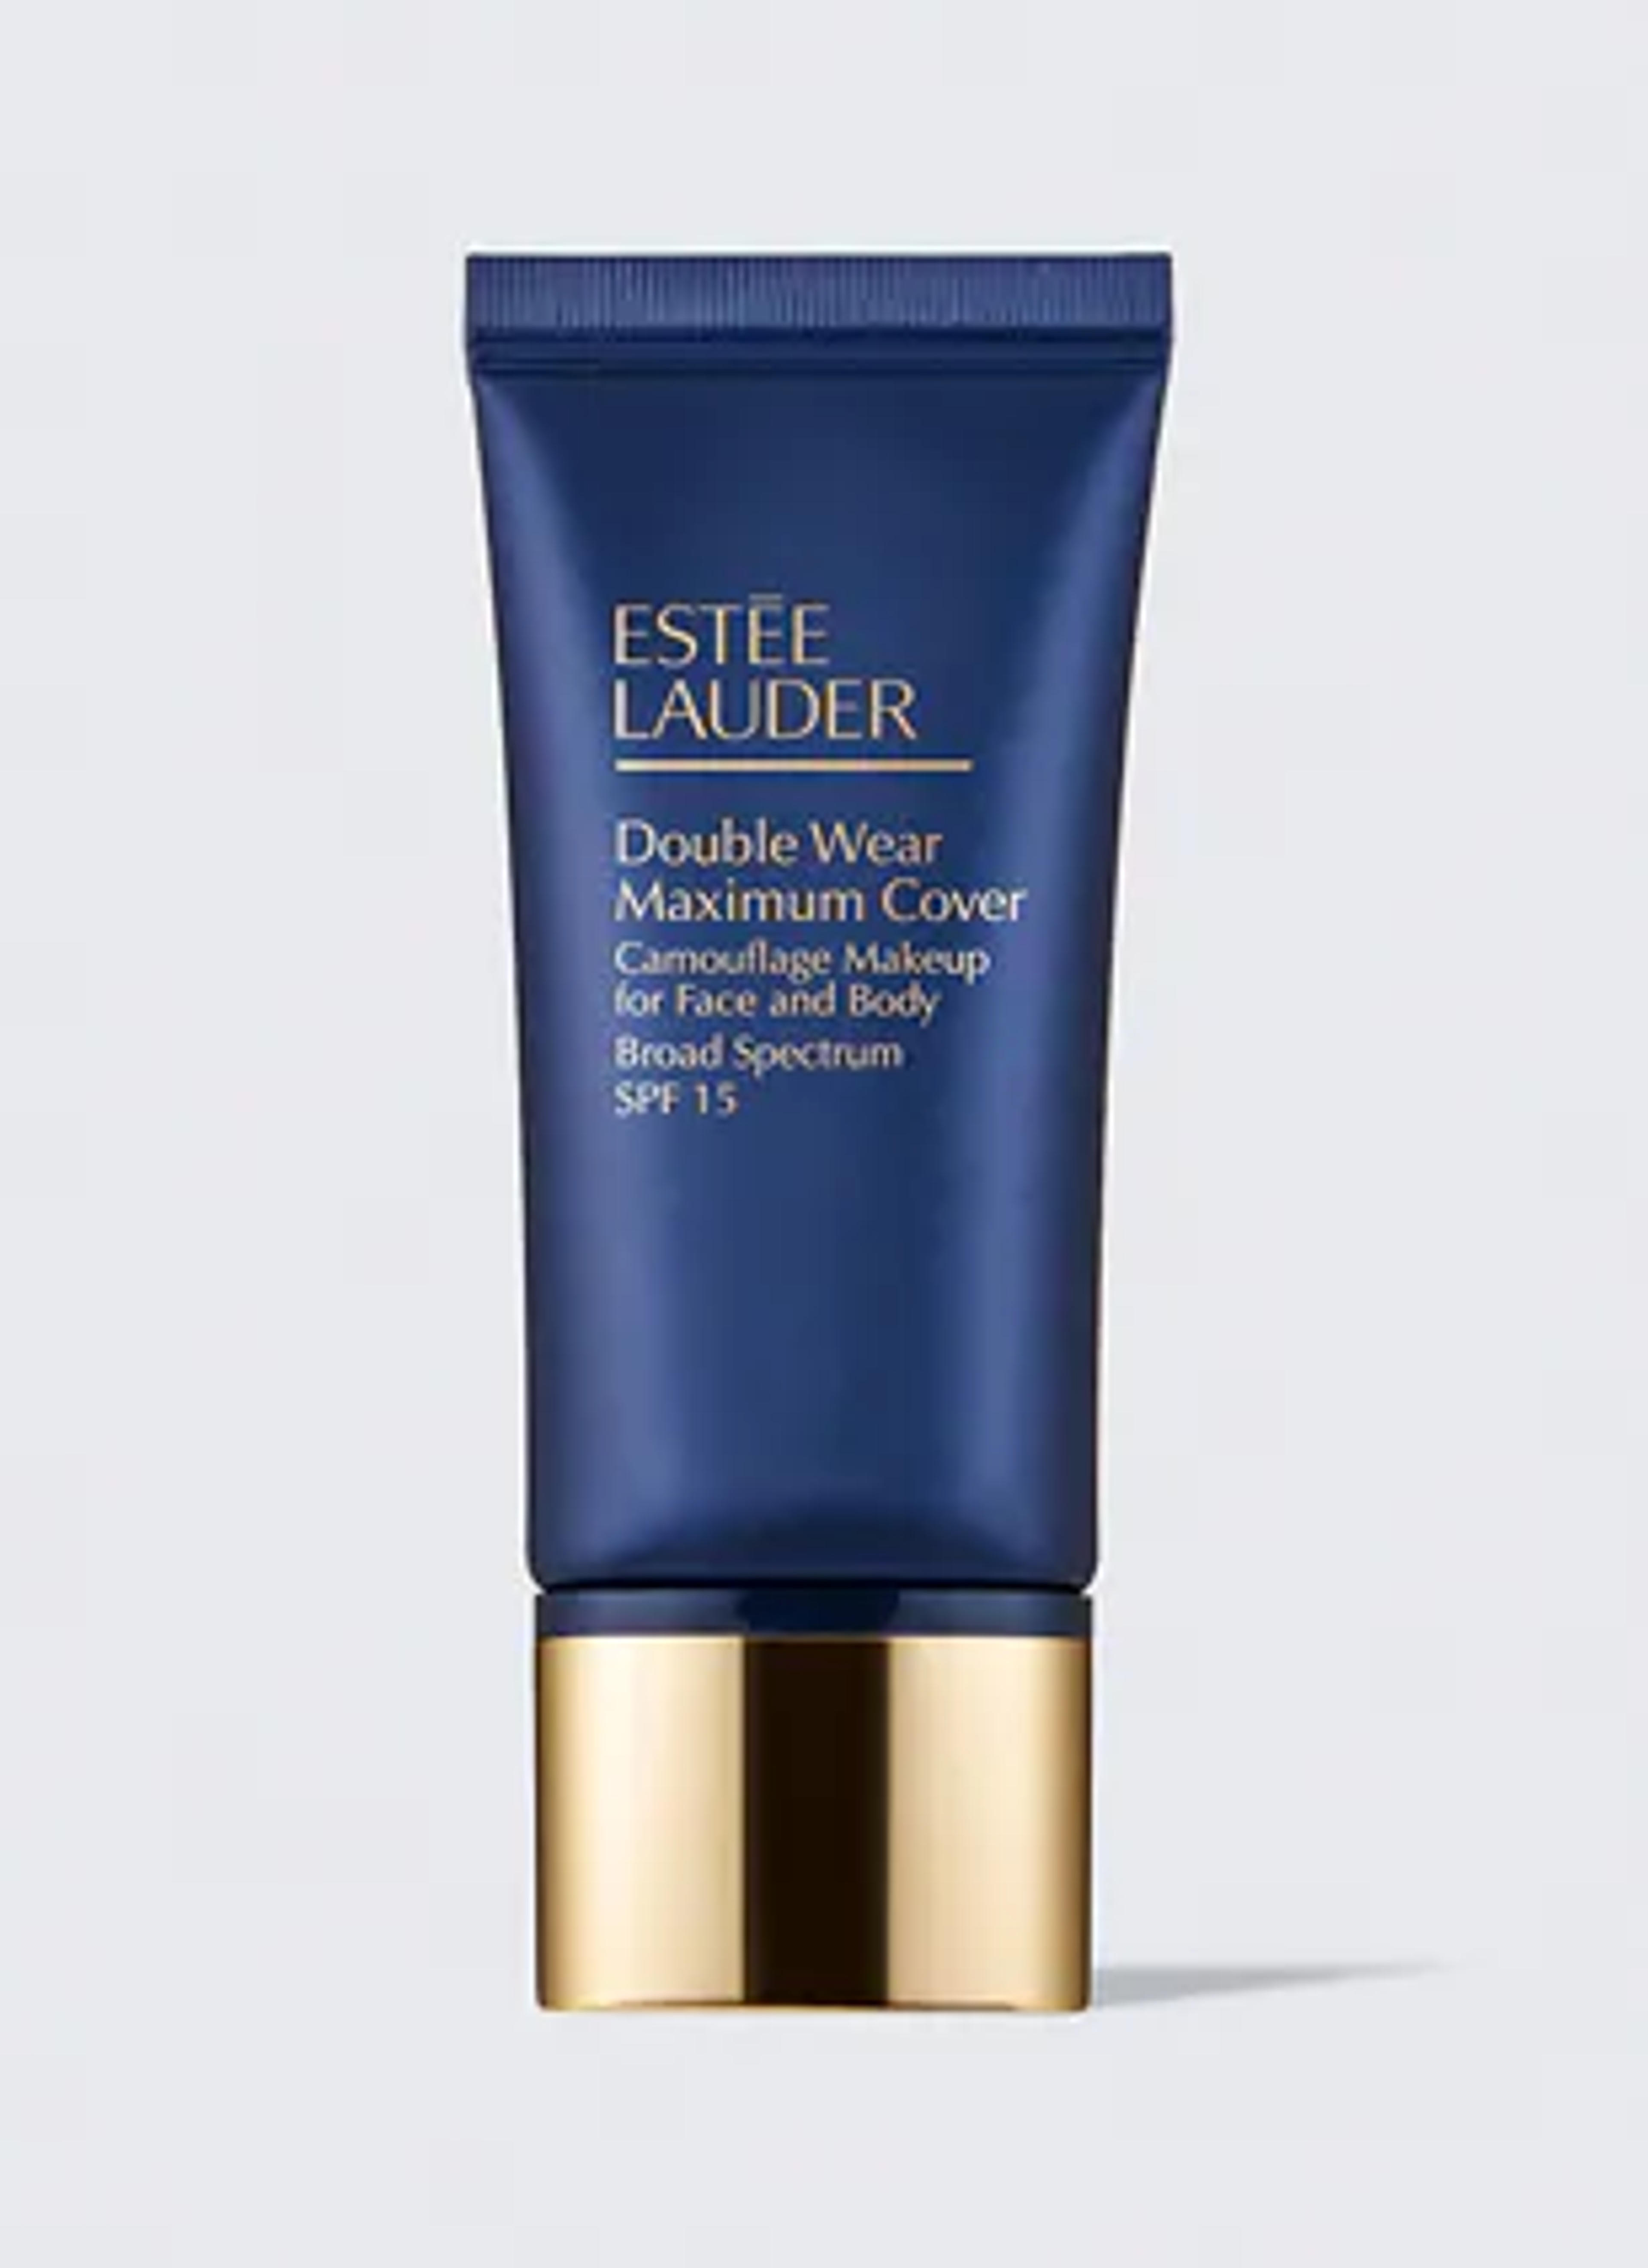 Double Wear Maximum Cover Camouflage Foundation for Face and Body SPF 15 | Estée Lauder Official Site